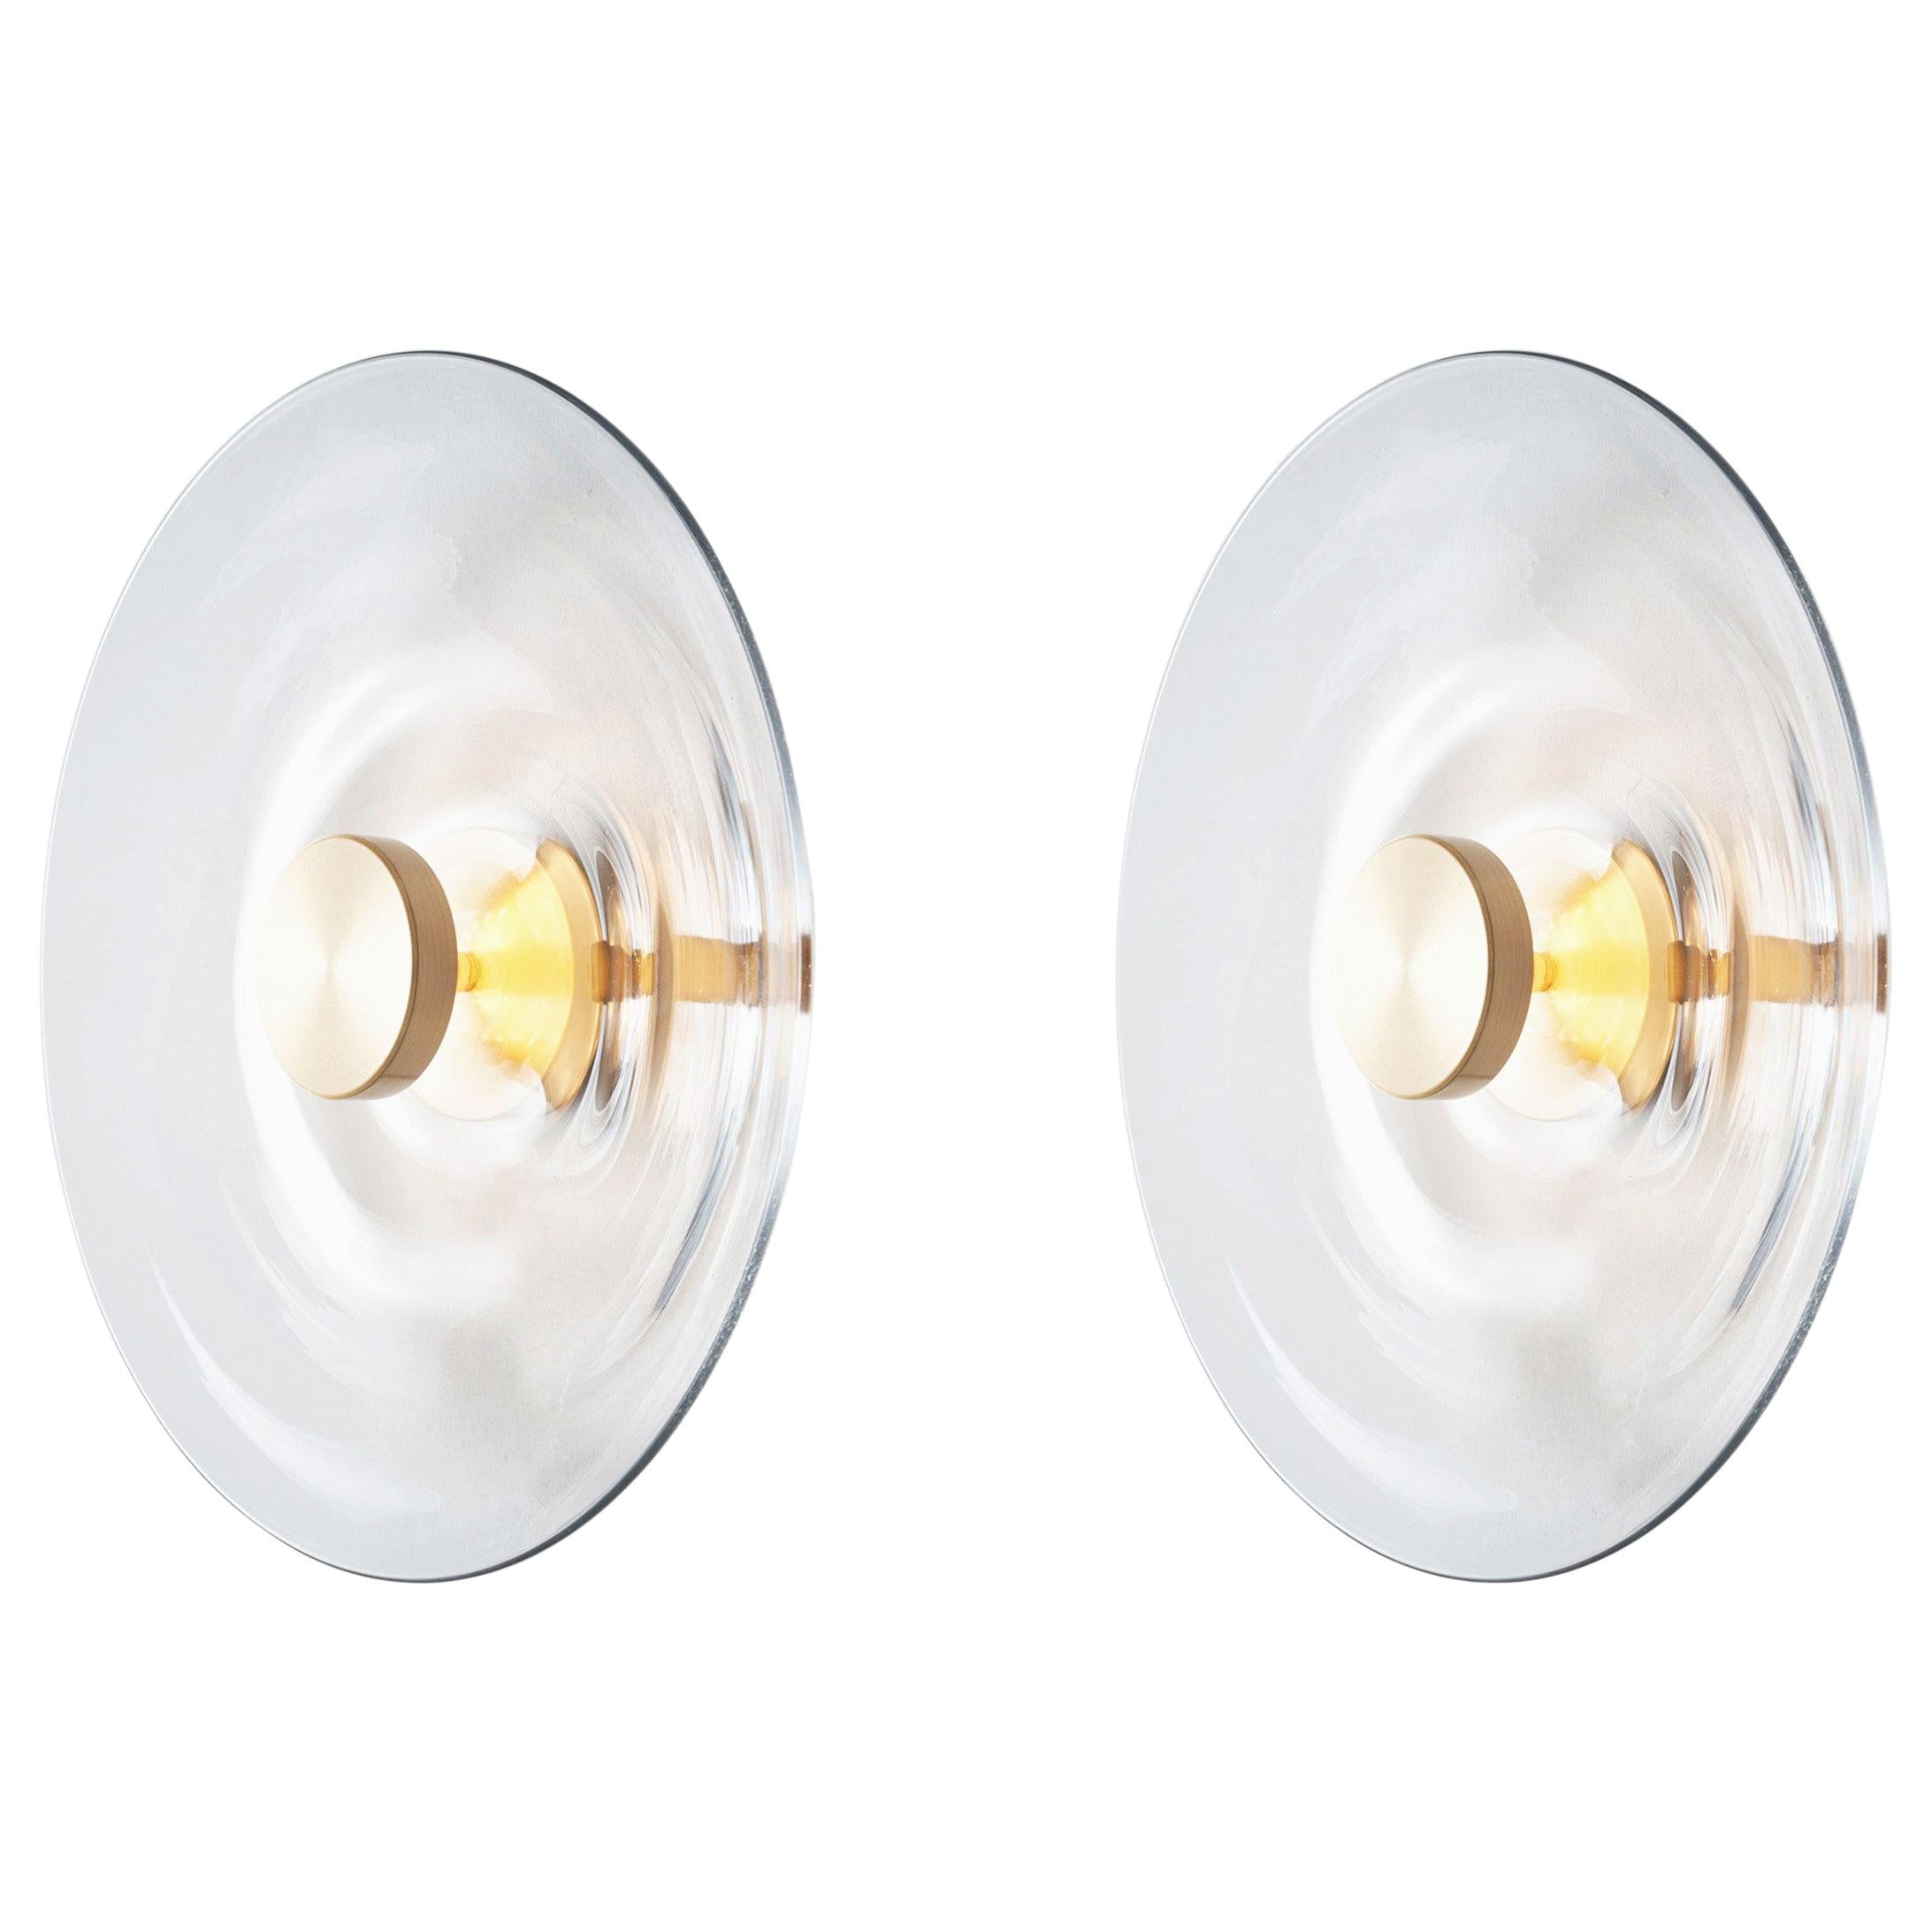 Sample Pair, 'Liquid Clear' Glass and Brass Contemporary Wall Light Sconce